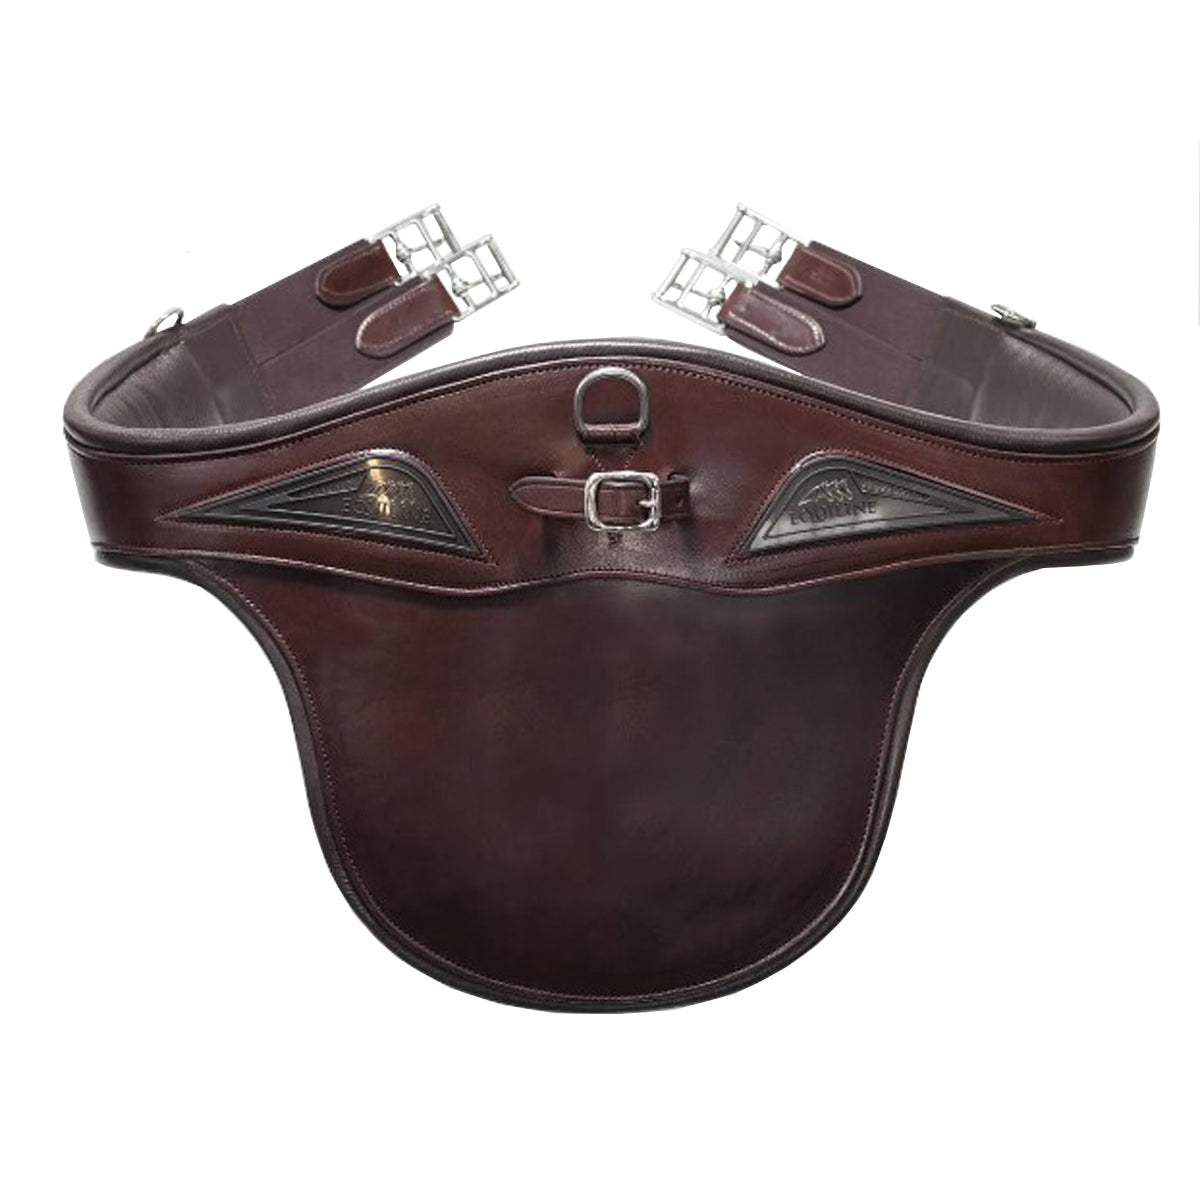 Equiline Stud Belly Guard Girth